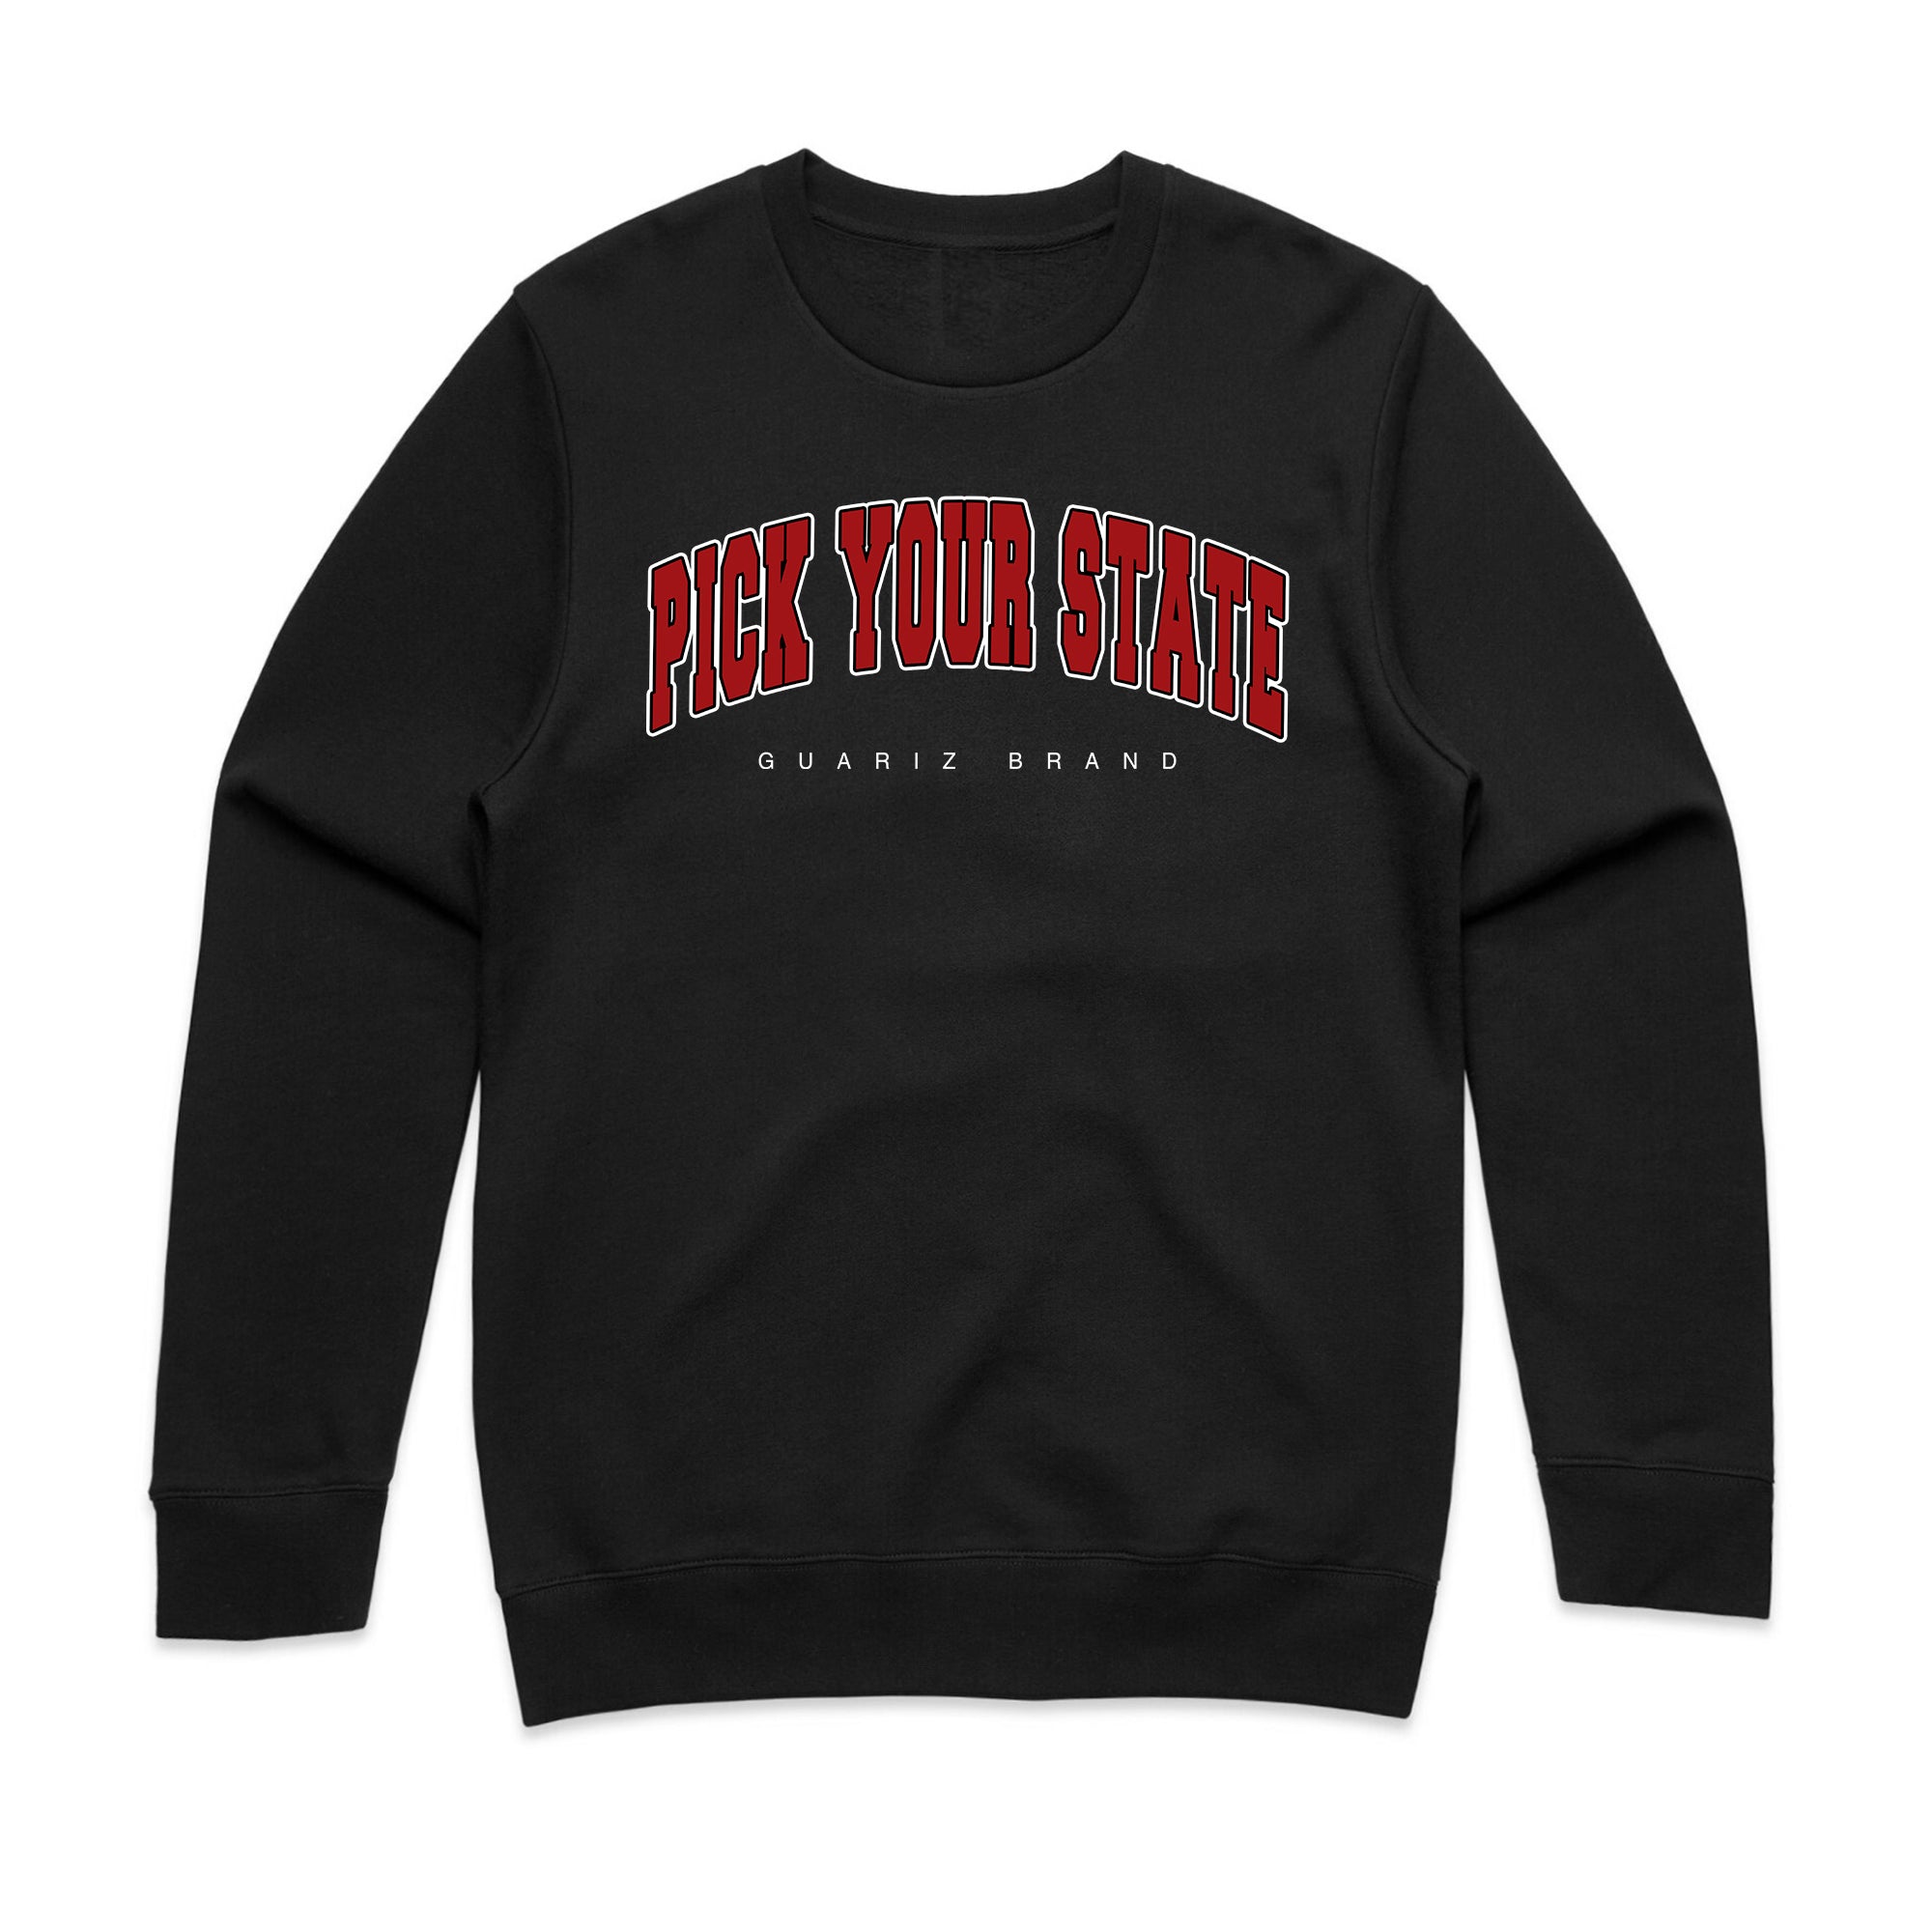 MEXICO STATE SWEATSHIRTS™ (SOLD OUT)